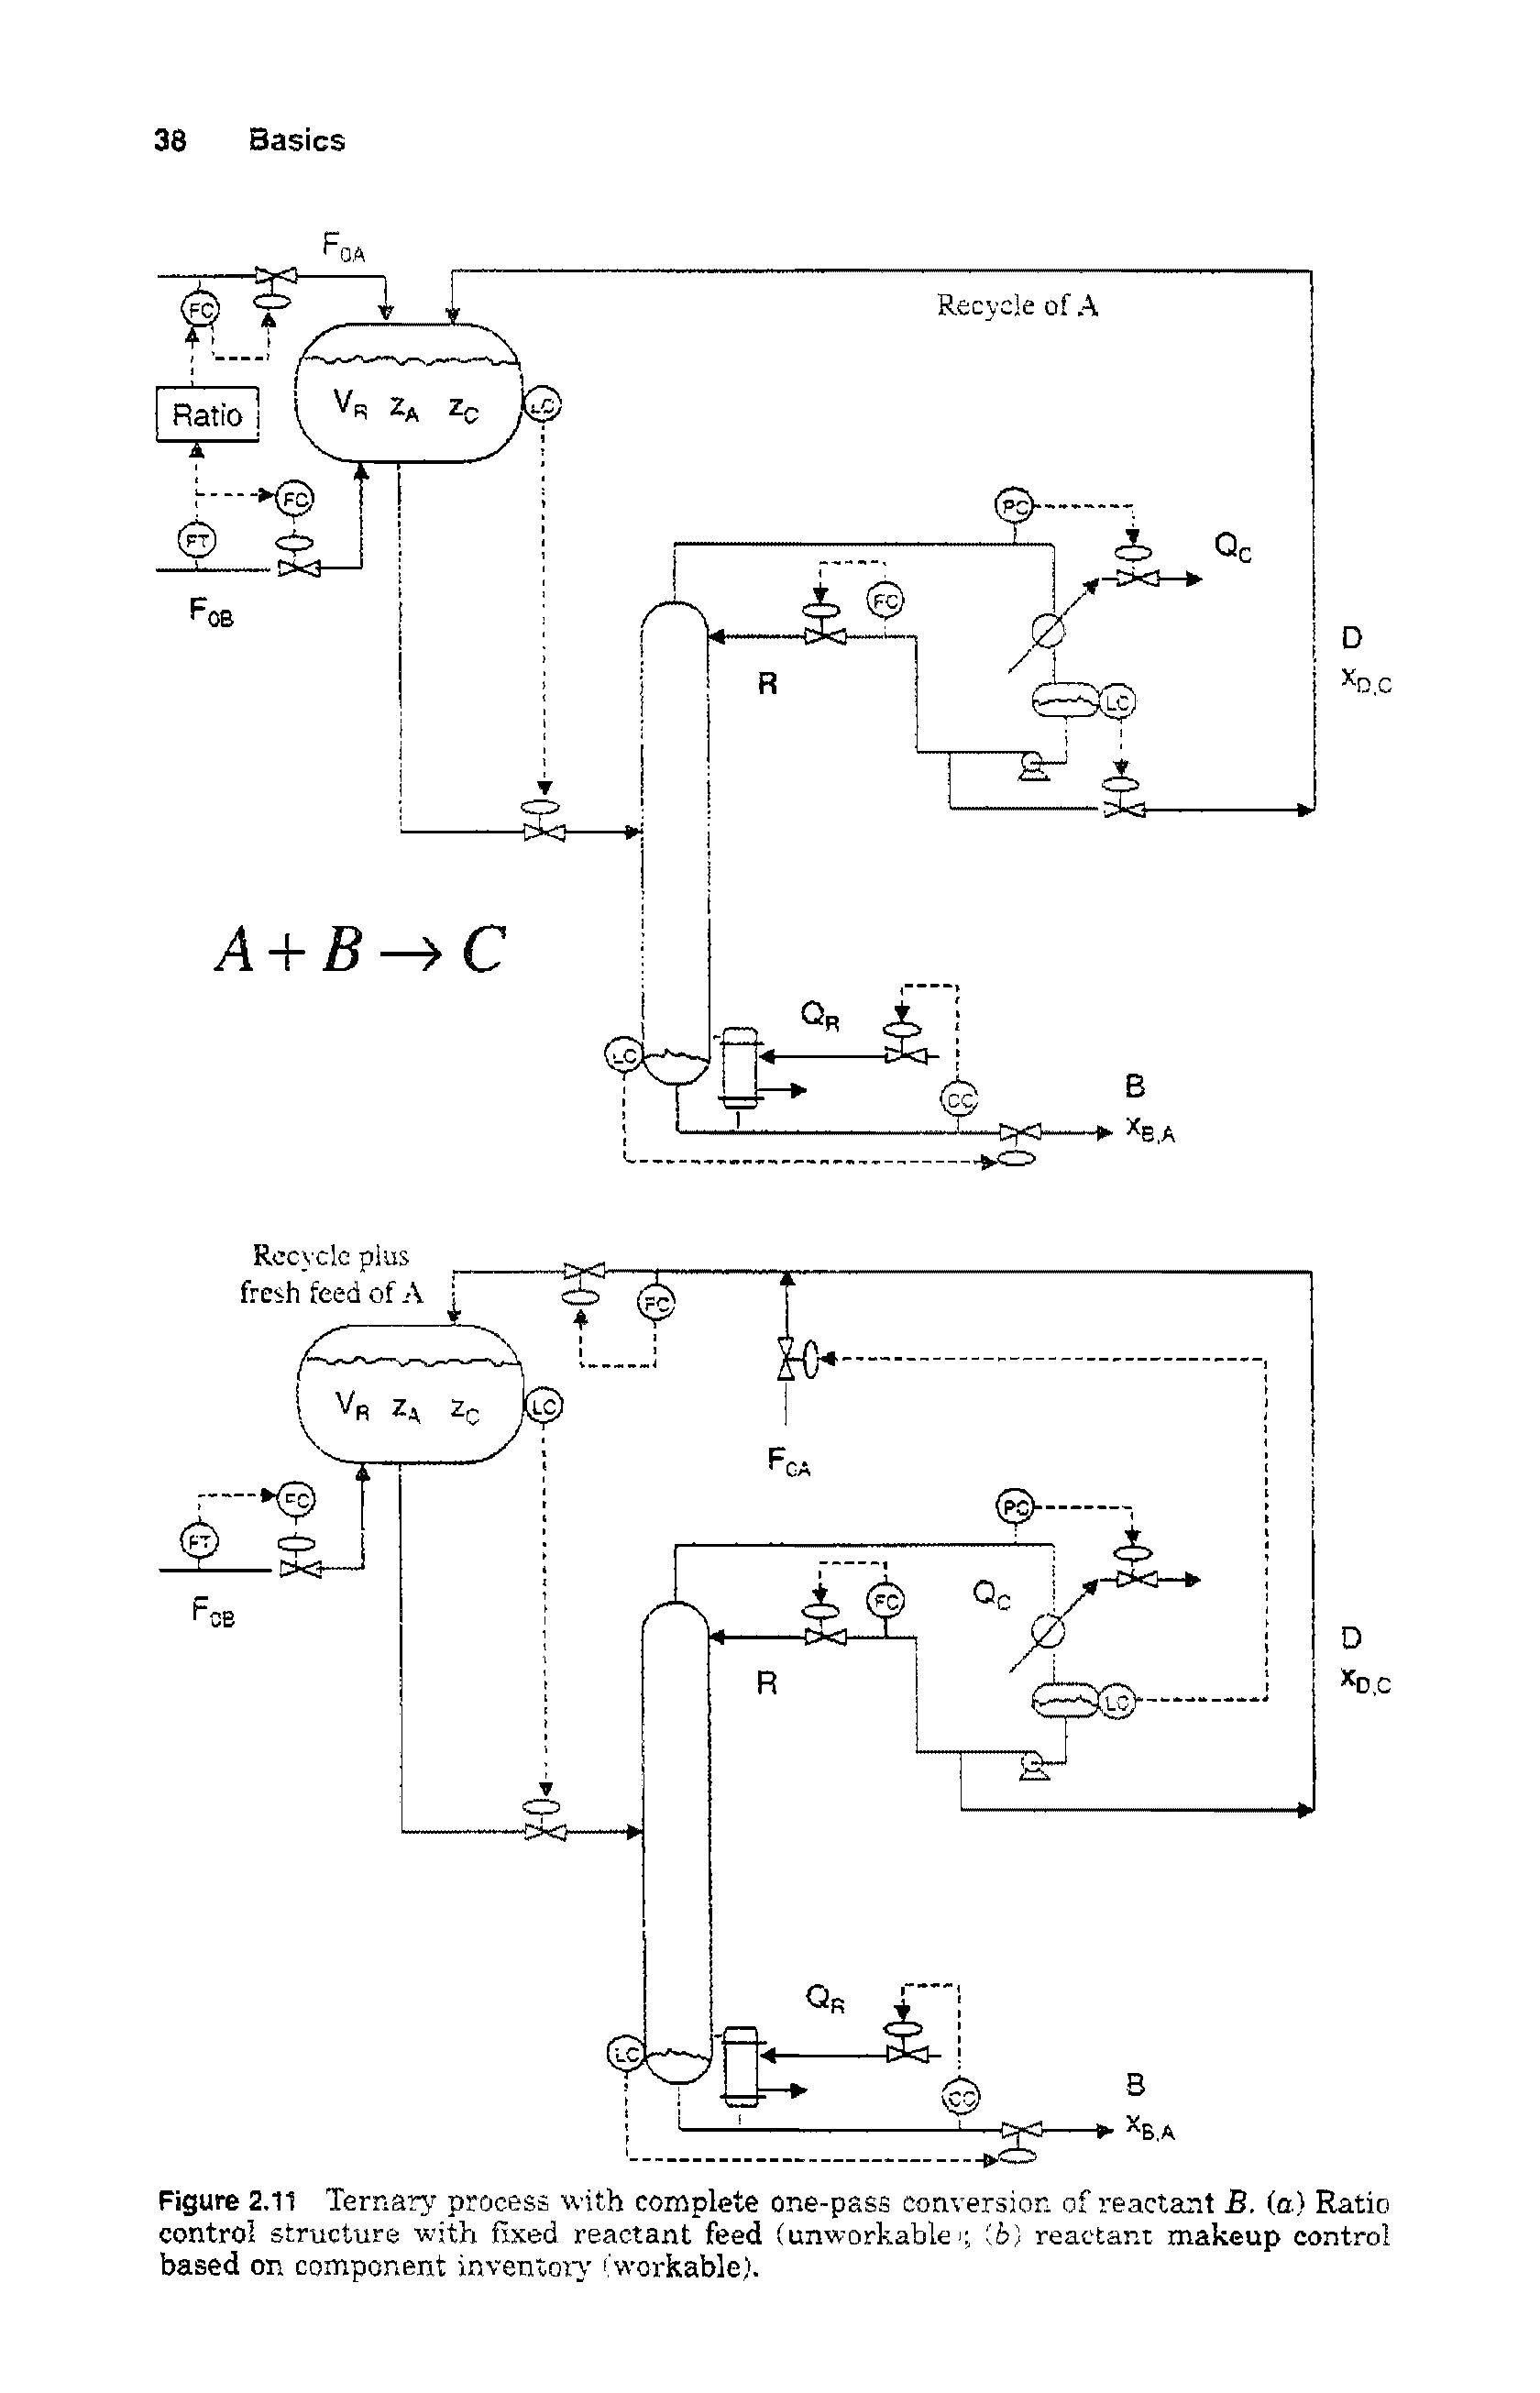 Figure 2.11 Ternary process with complete one-pass conversion of reactant B. (a) Ratio control structure with fixed reactant feed (unworkable) (i>) reactant makeup control based on component inventory ( workable).